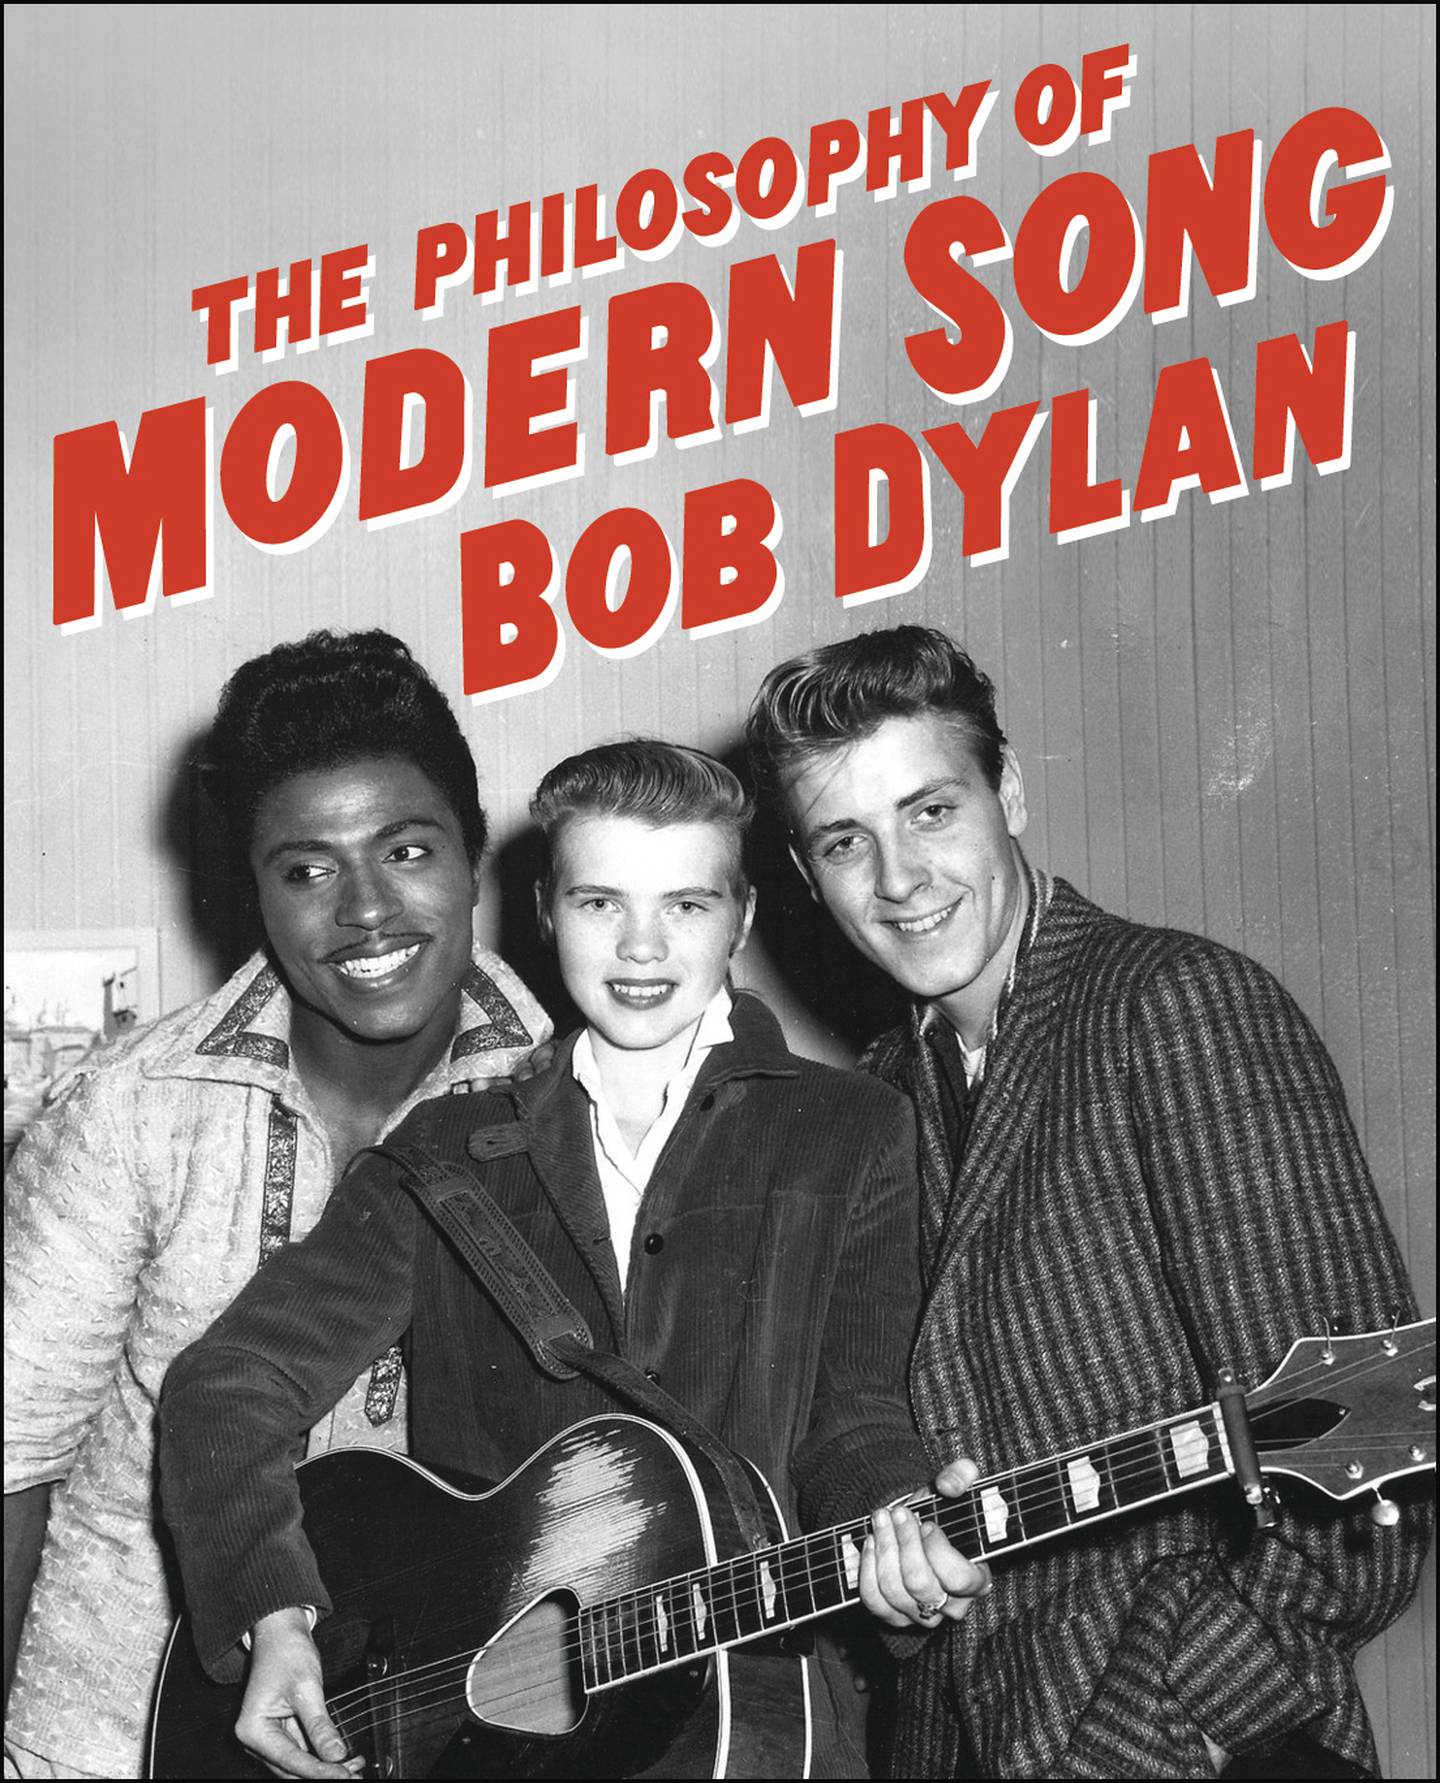 The cover of Bob Dylan's 'The Philosophy of Modern Song'. Photo: Simon & Schuster